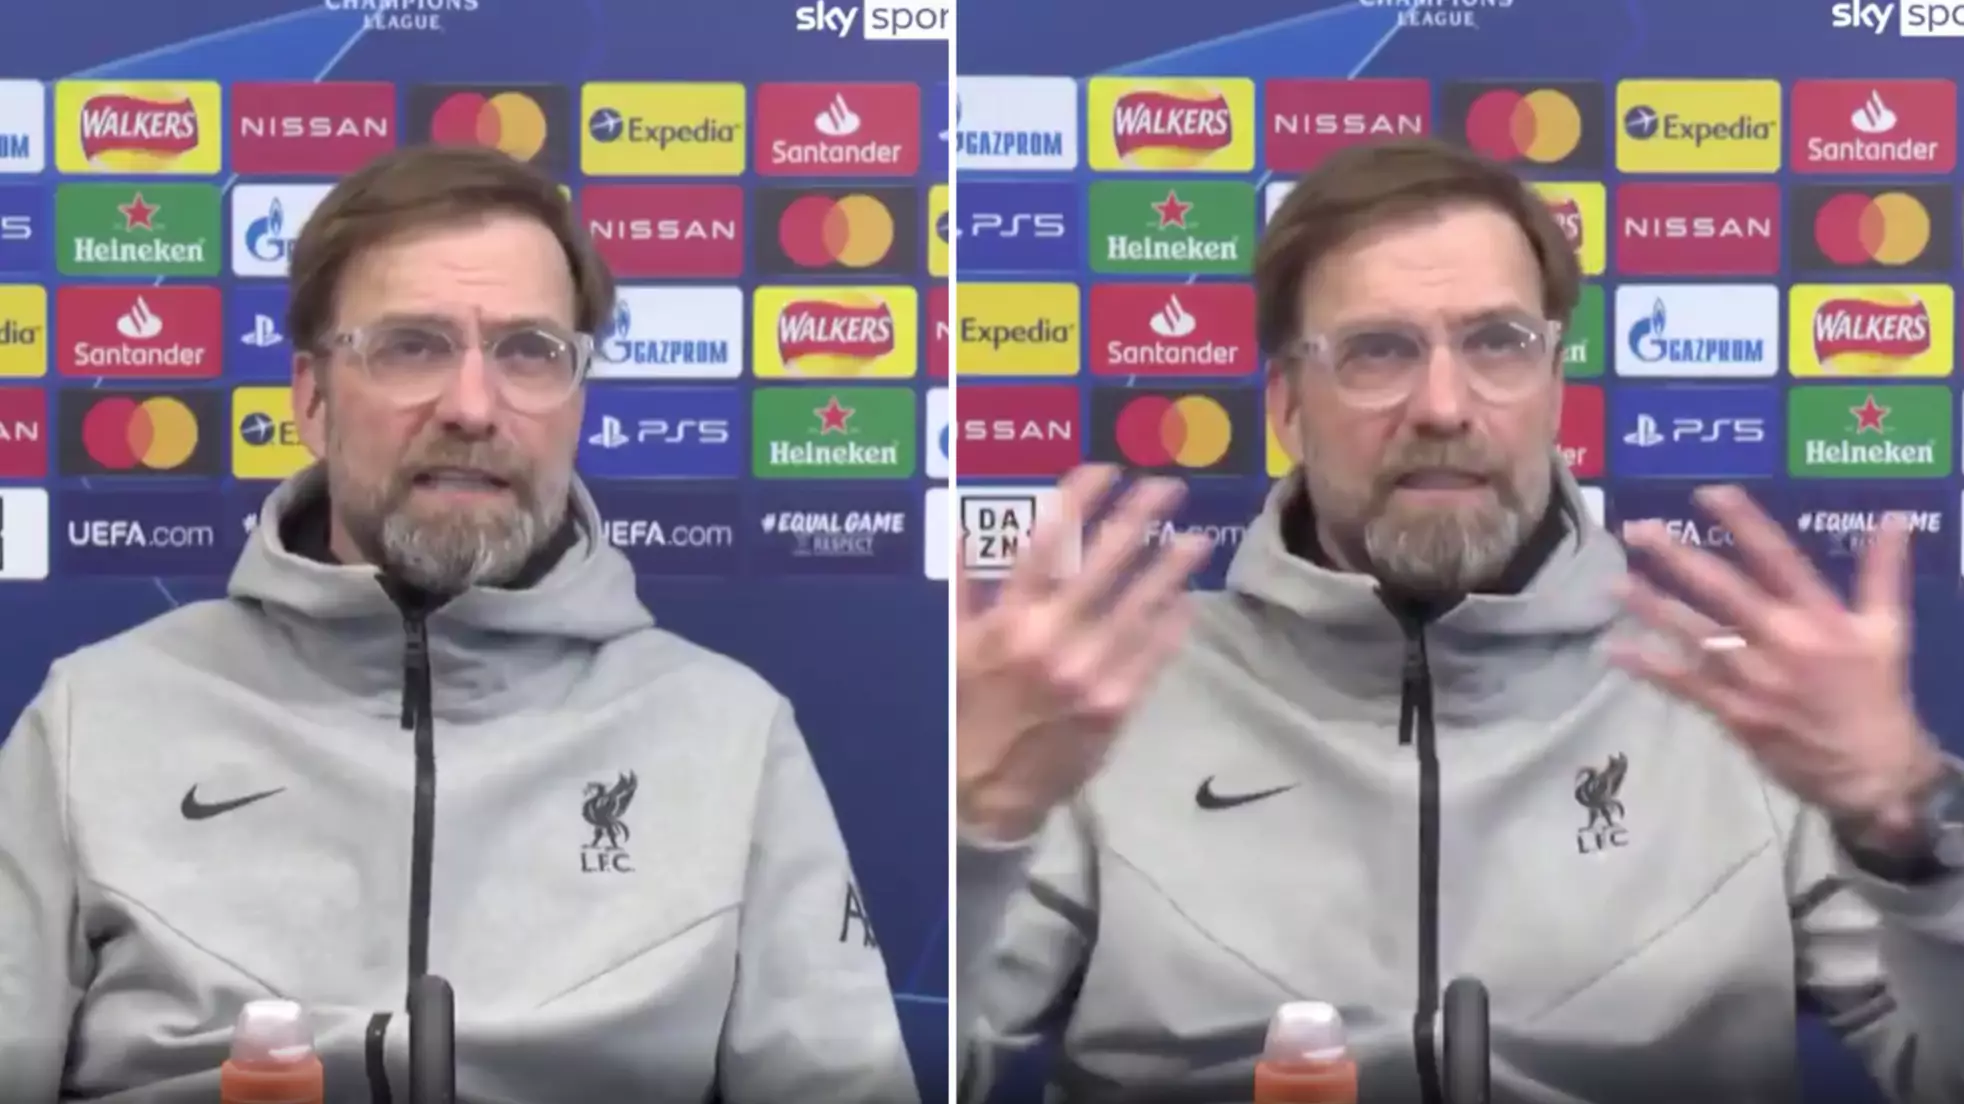 Jurgen Klopp Responds To Speculation That He’s About To Leave Liverpool